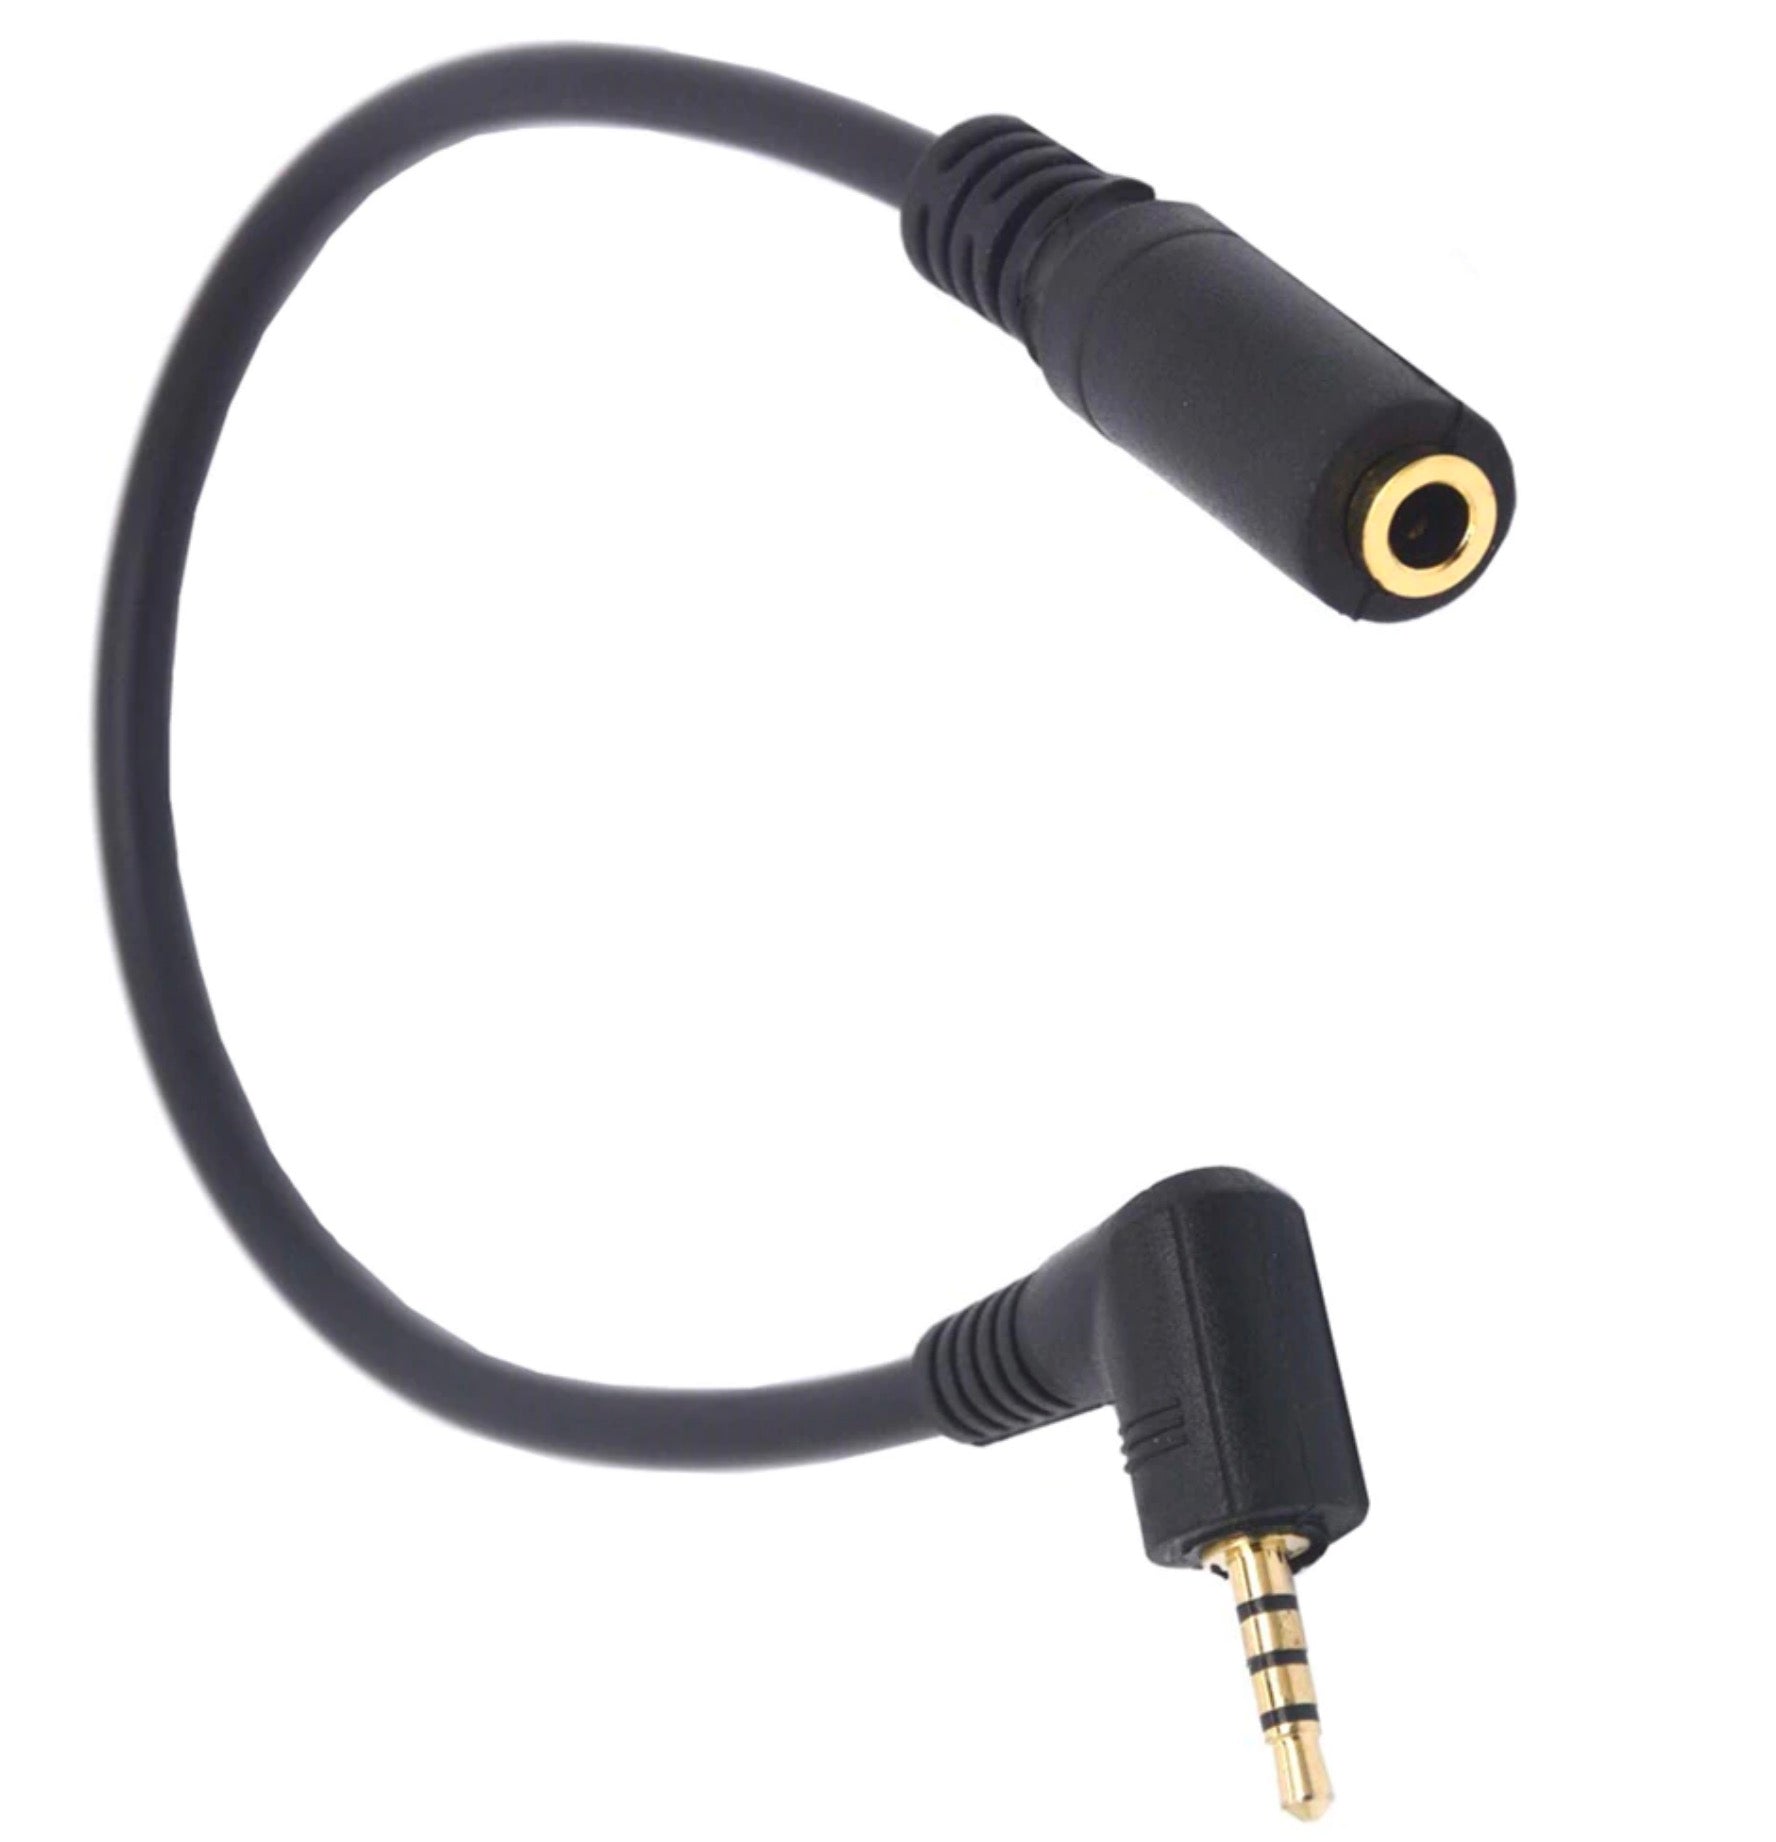 2.5mm 4 Pole Male to 3.5mm Female Stereo Audio Headphone Cable 0.2m